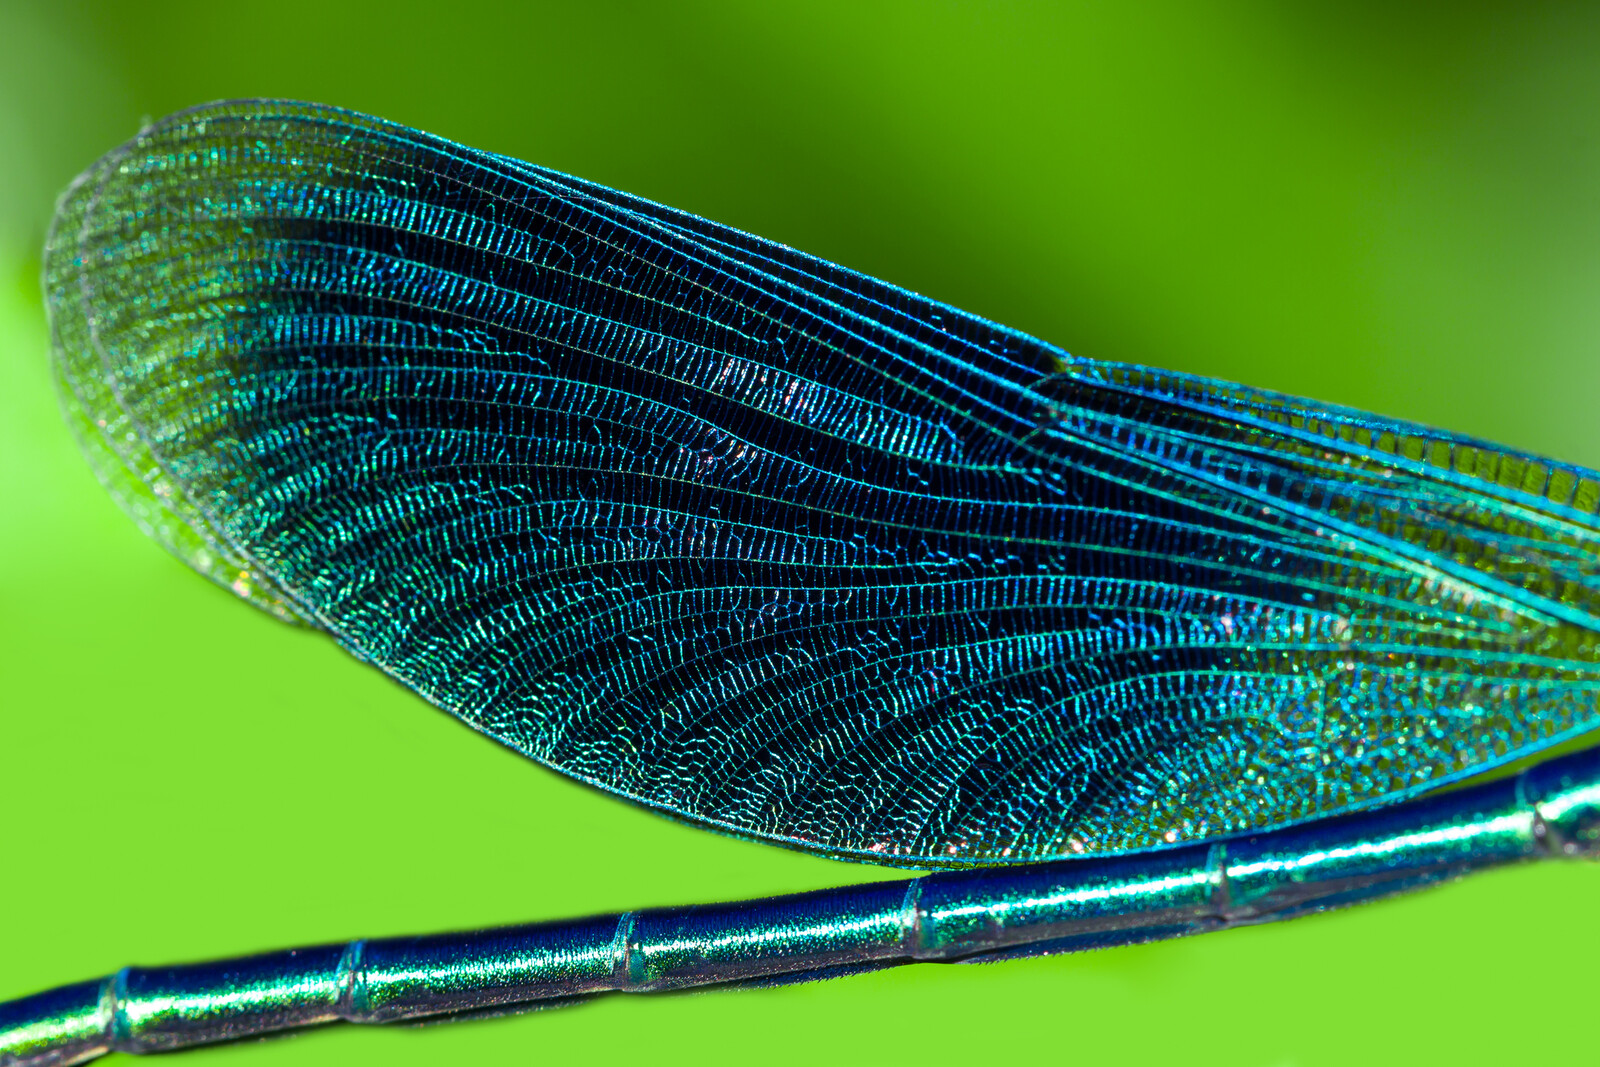 dragonfly wing on a green background